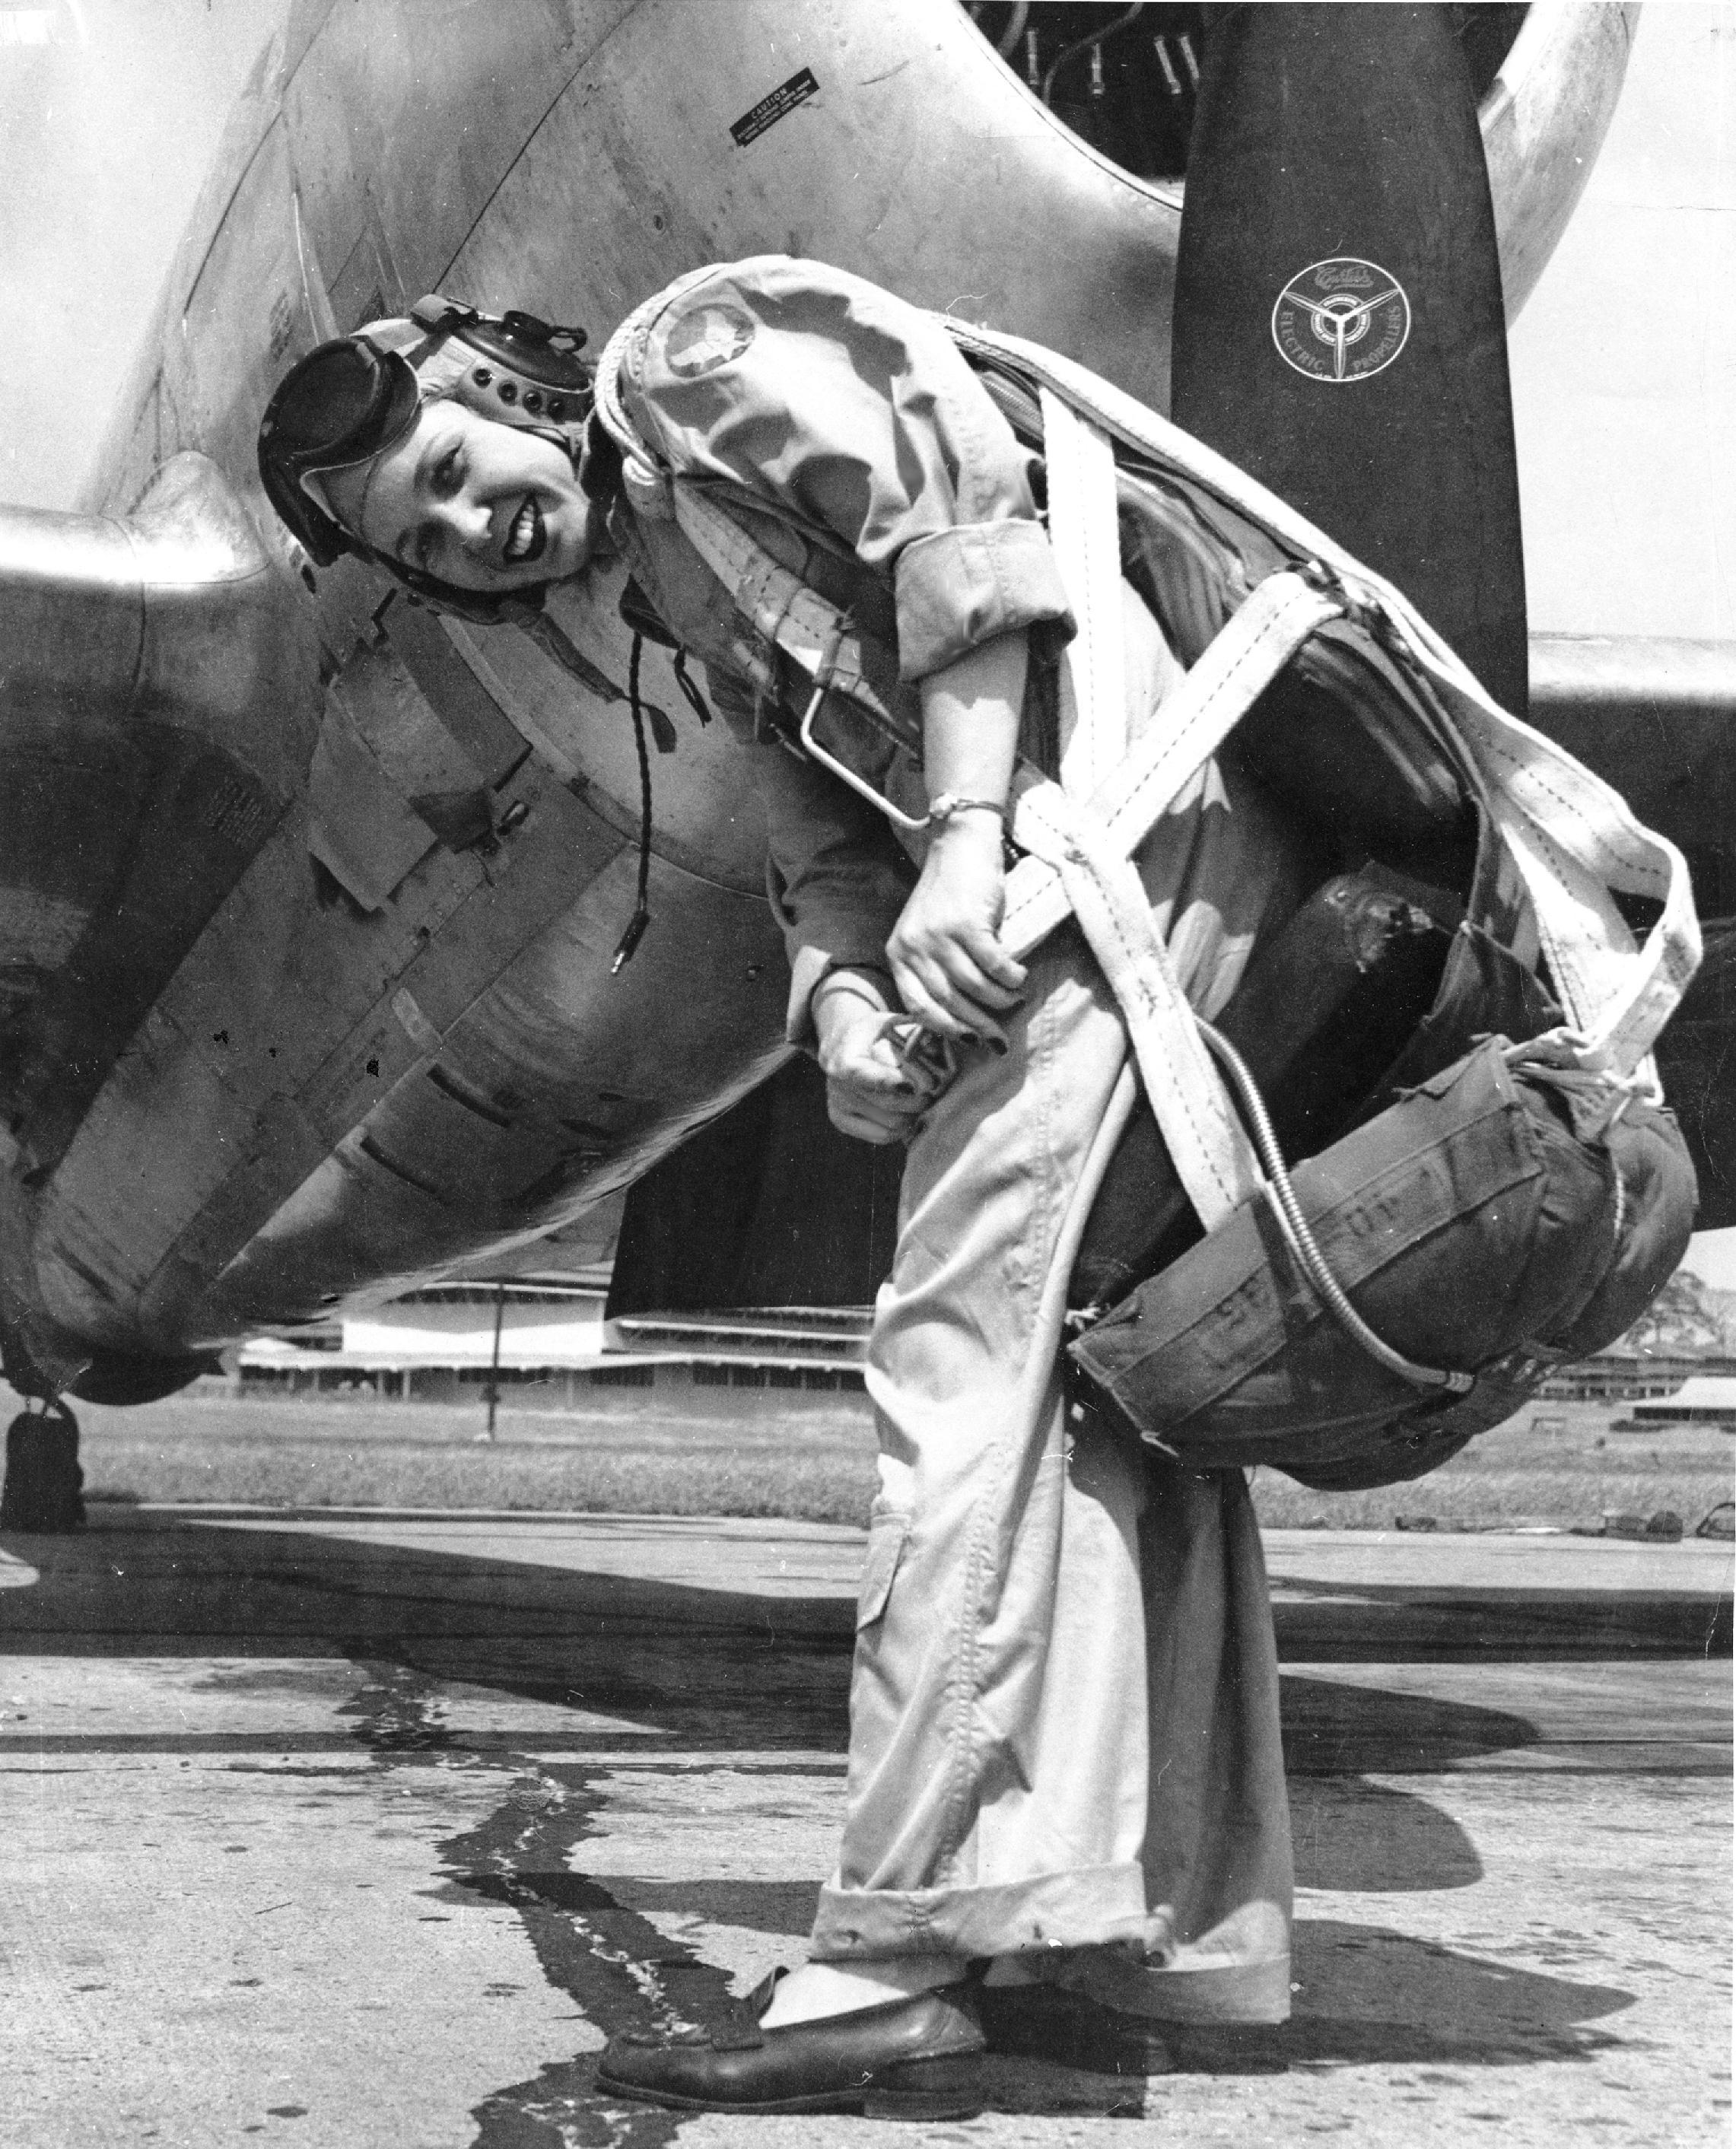 WASP pilot Deanie (Bishop) Parrish in front of her P-47 Thunderbolt aircraft, circa early 1940s